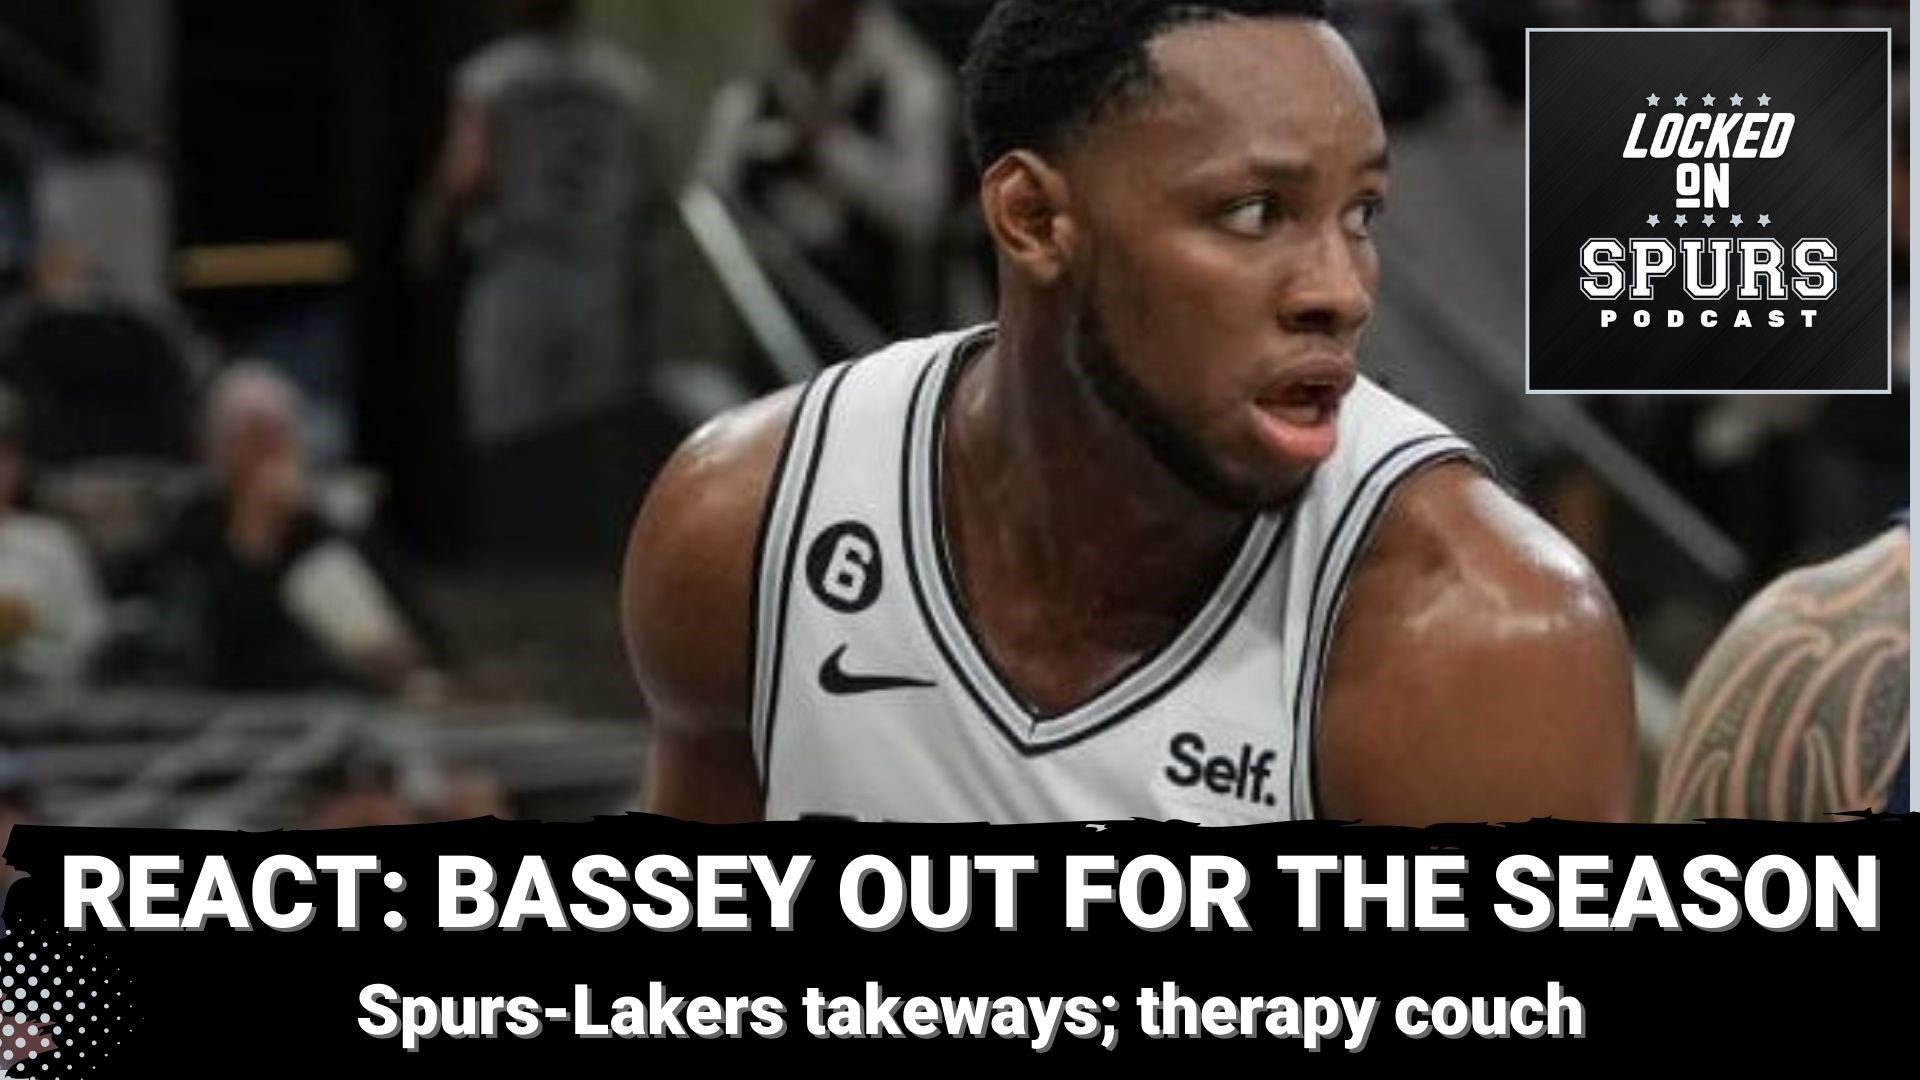 What does the absence of Bassey mean for other Spurs bigs?